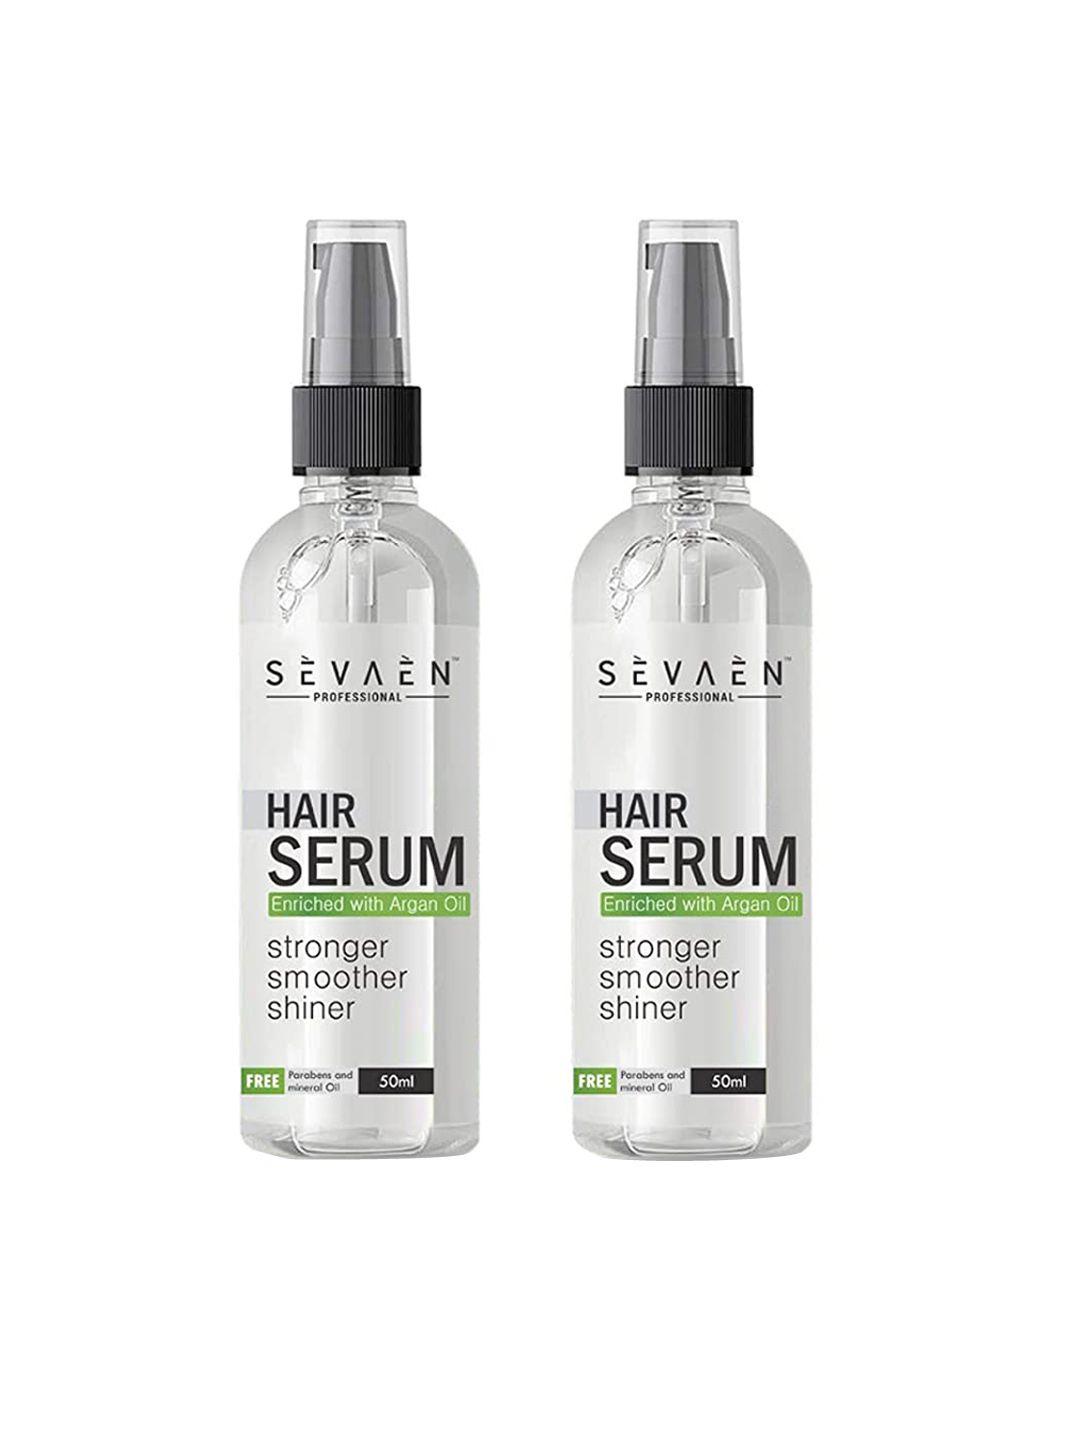 sevaen set of 2 hair serums for silky & smooth hair with almond and argan oil - 50ml each